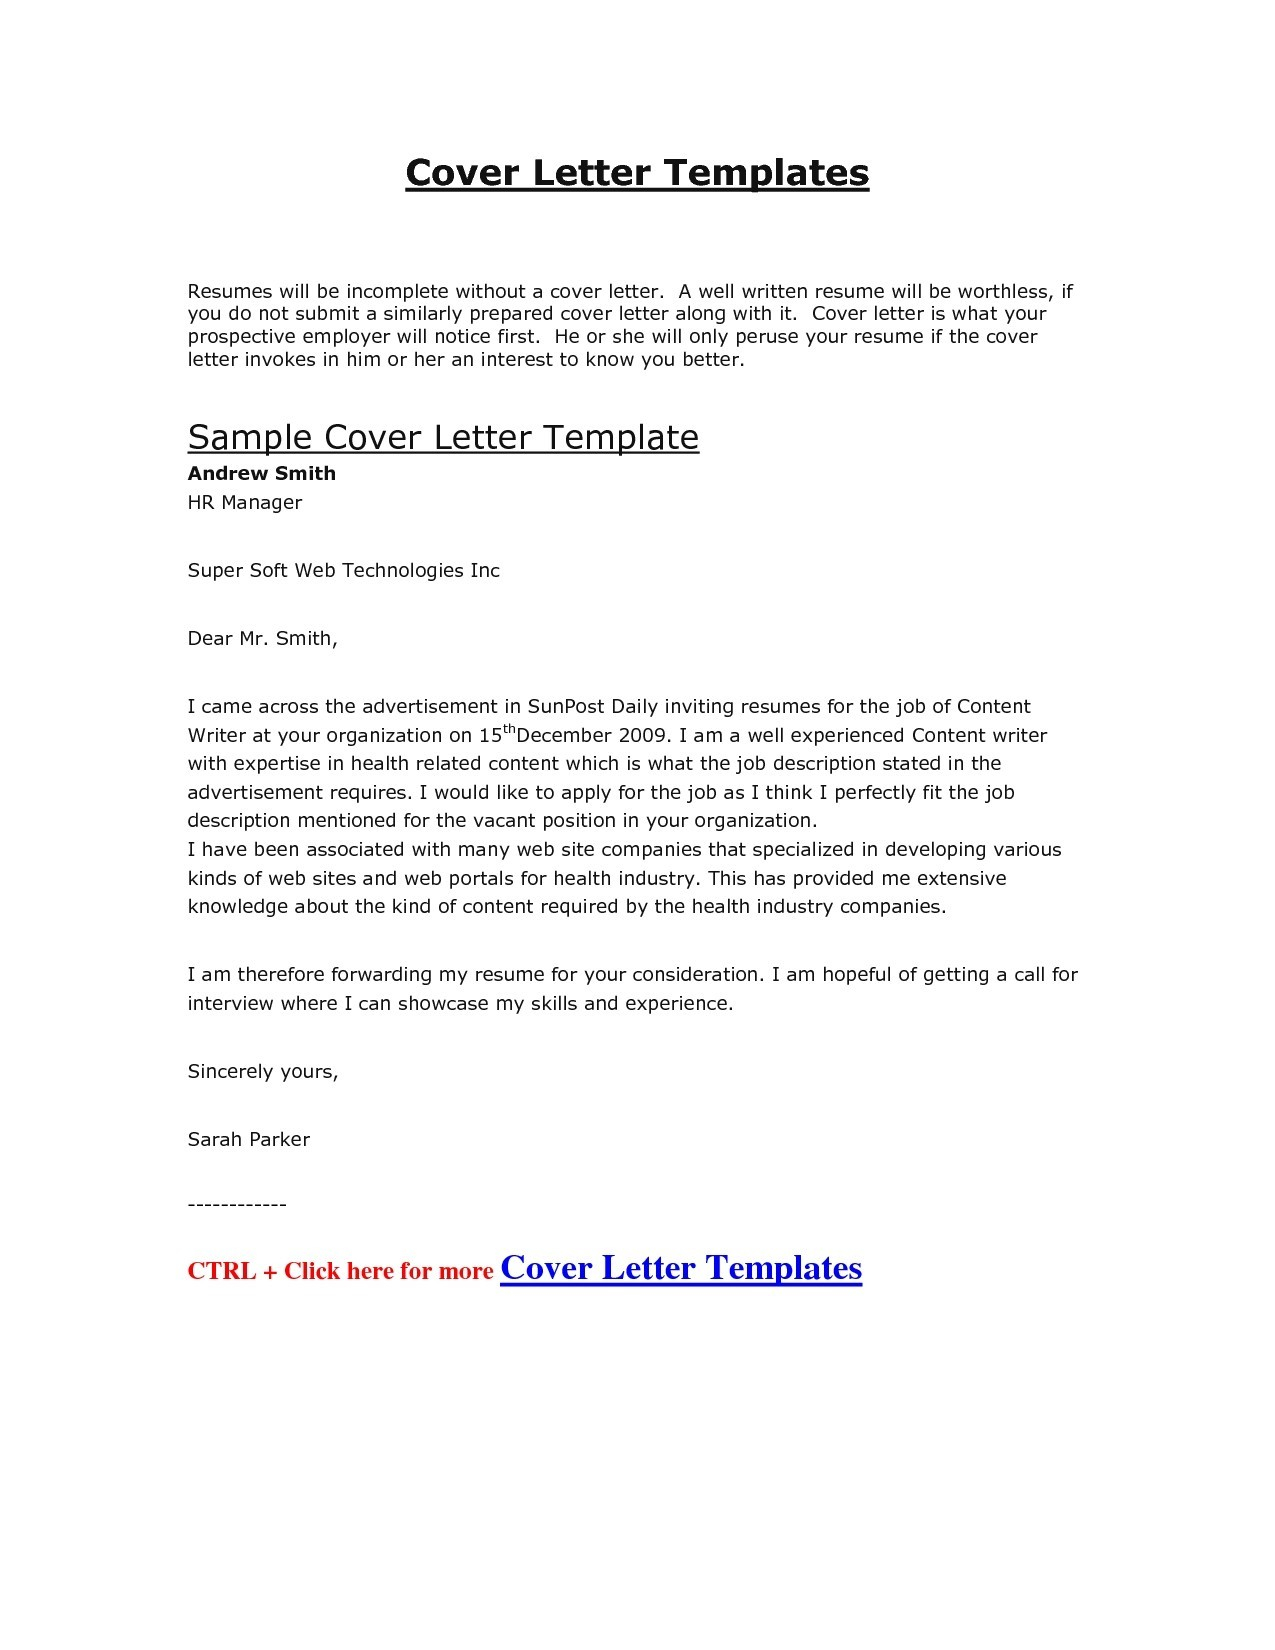 Good Cover Letter Template - Job Application Letter format Template Copy Cover Letter Template Hr